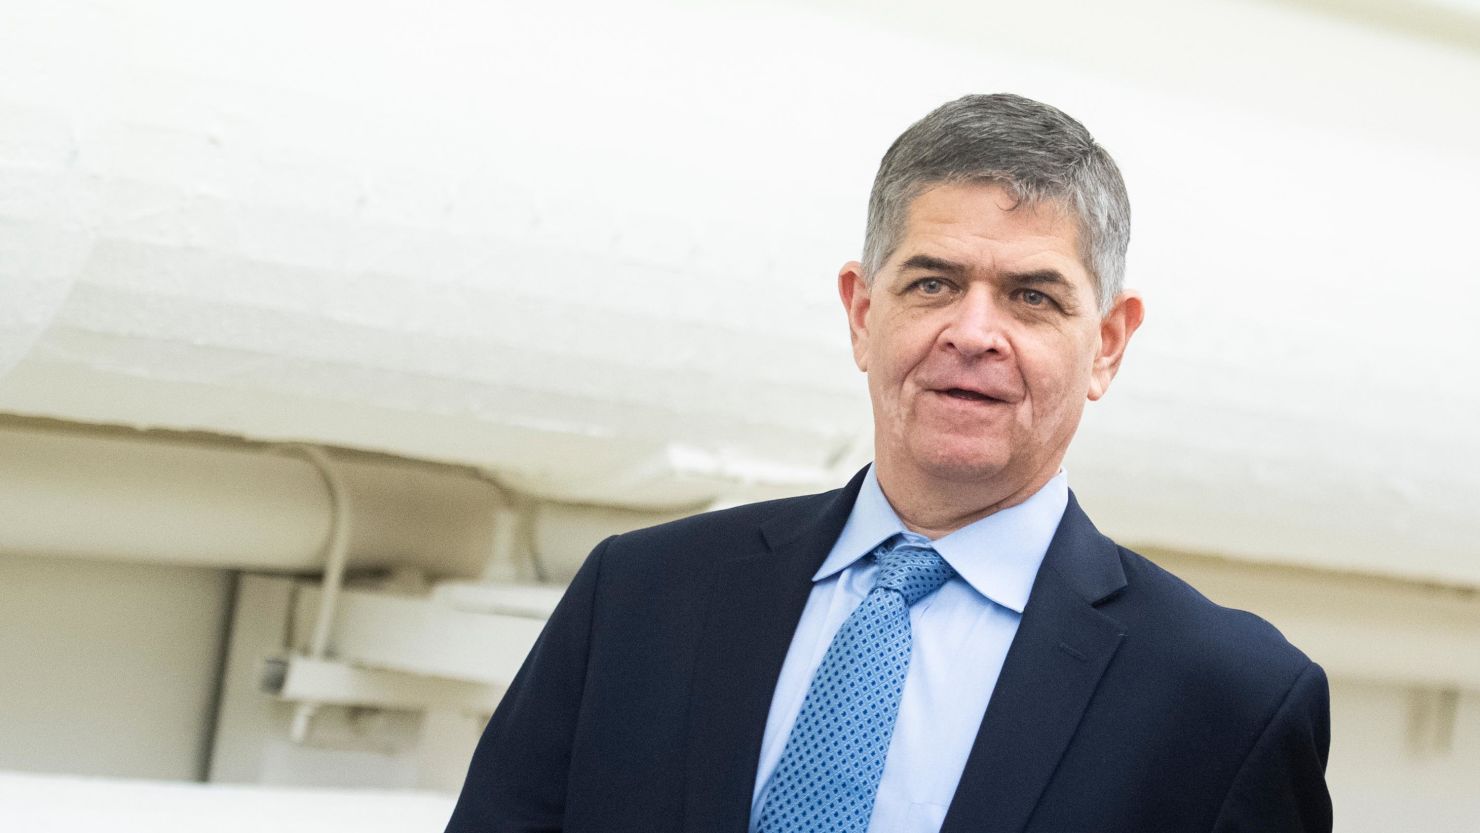 Rep. Filemon Vela, a Texas Democrat, is seen on Capitol Hill in Washington during procedural votes in December 2019. 